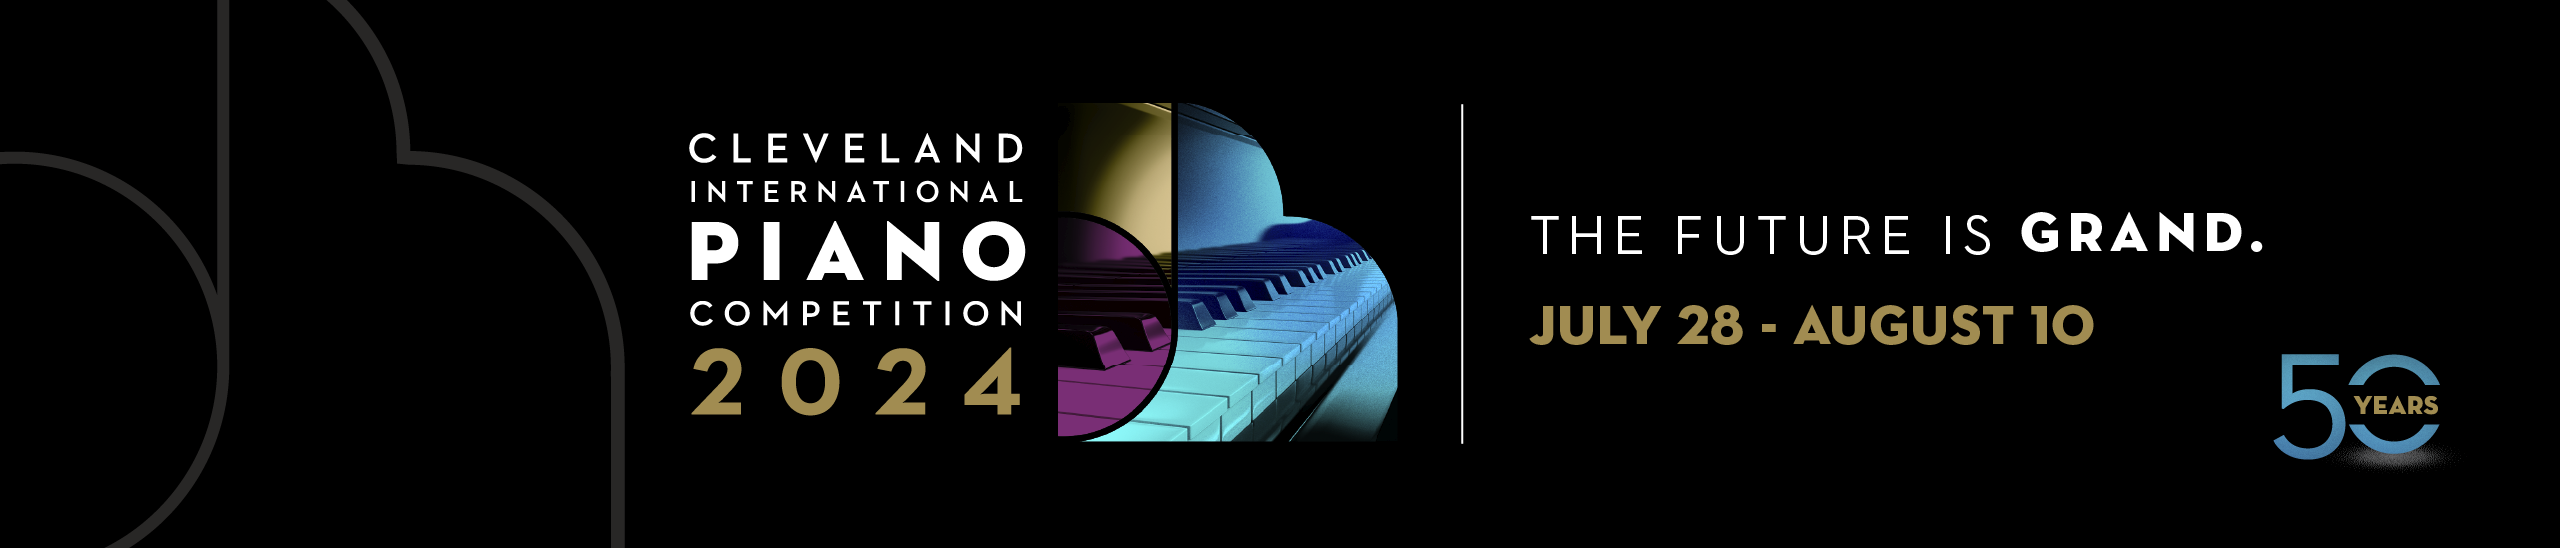 Cleveland International Piano Competition 2024 banner